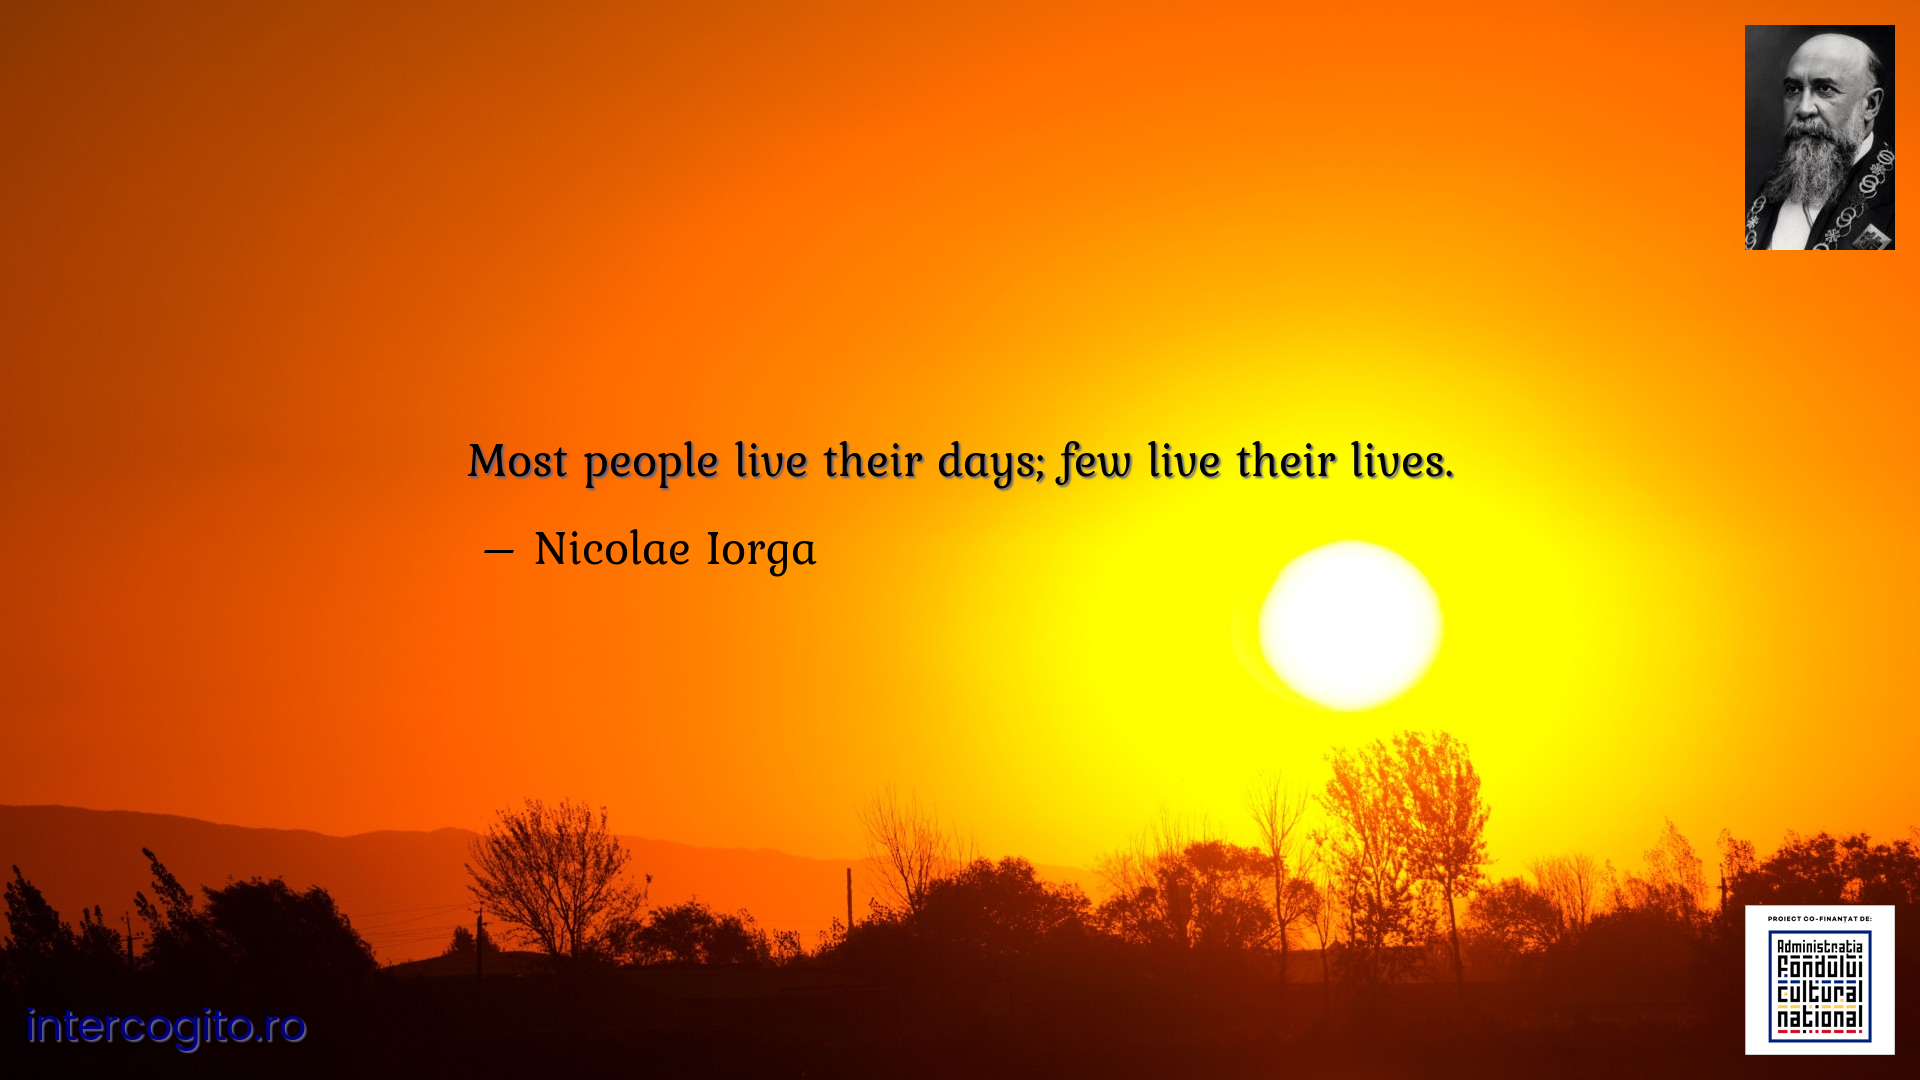 Most people live their days; few live their lives.